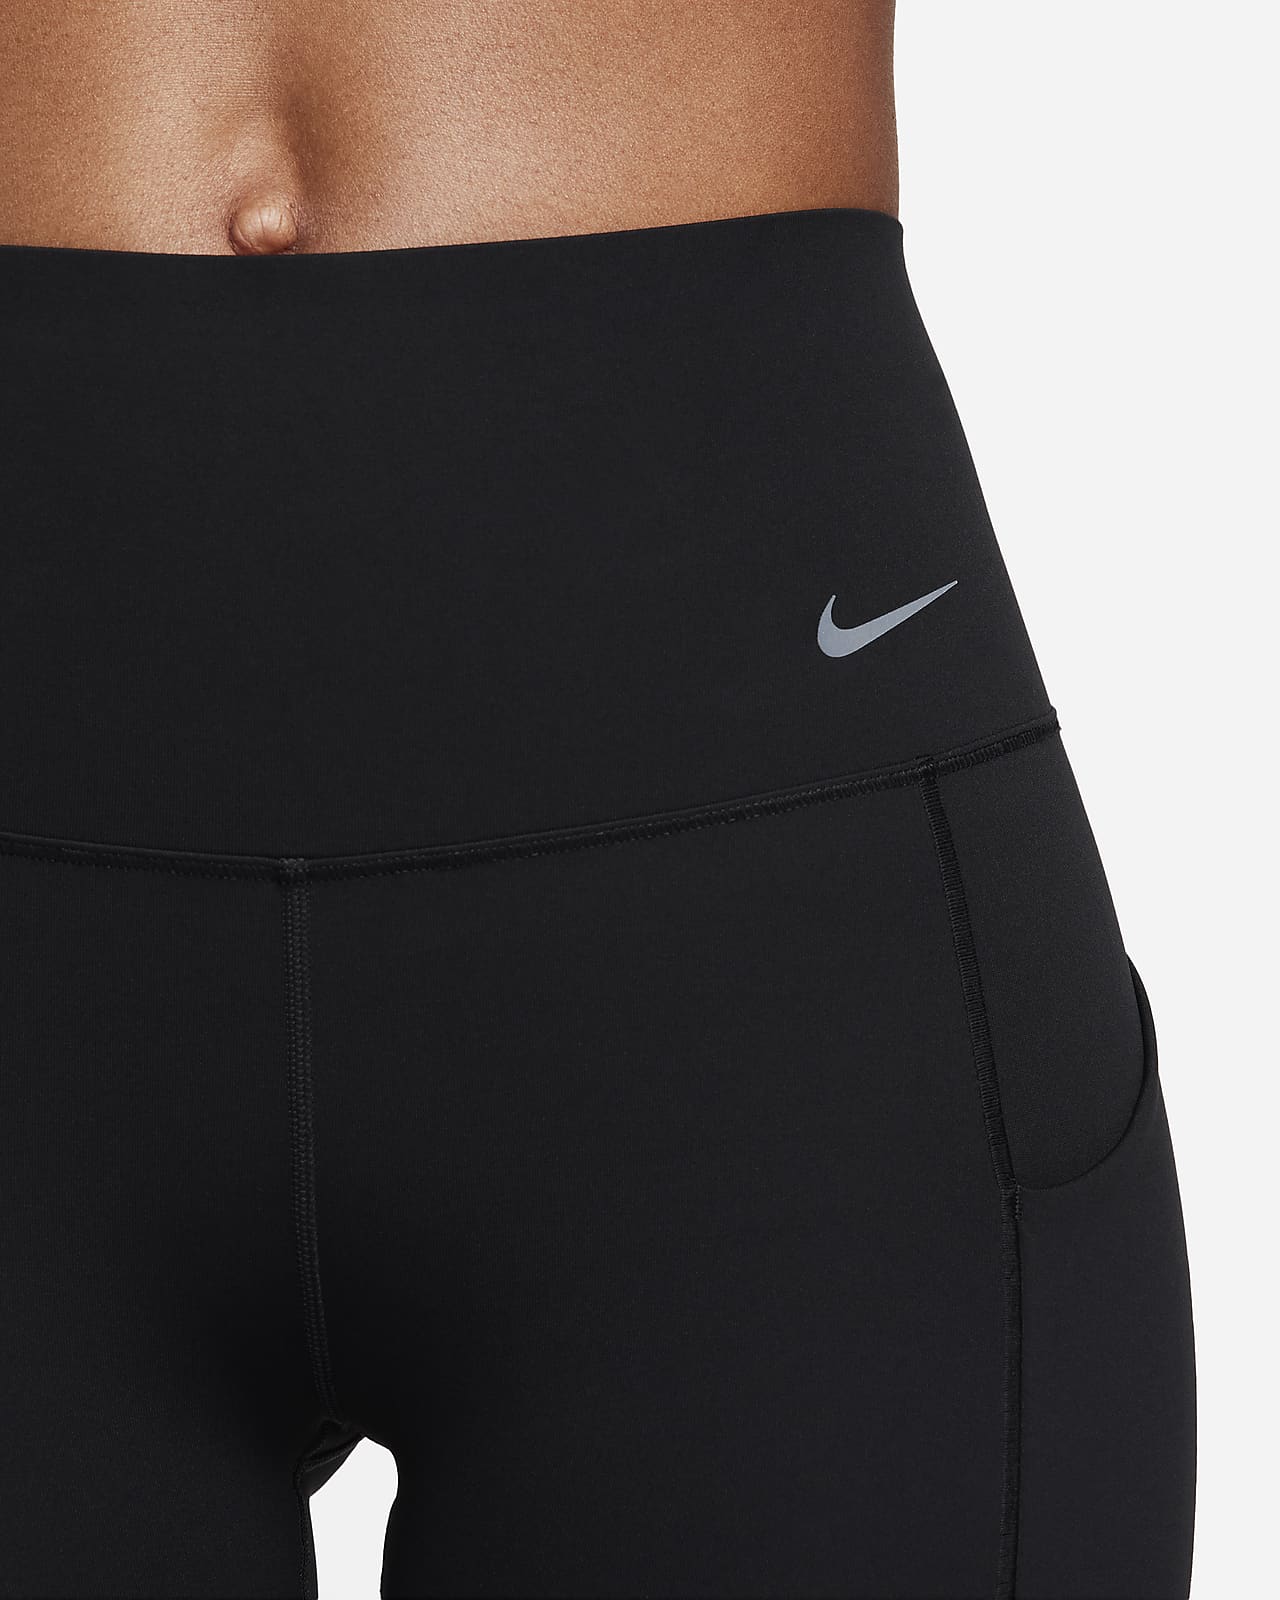 NIKE POWER LEGENDARY Tight Fit Training Tights Ankle Zip MID RISE